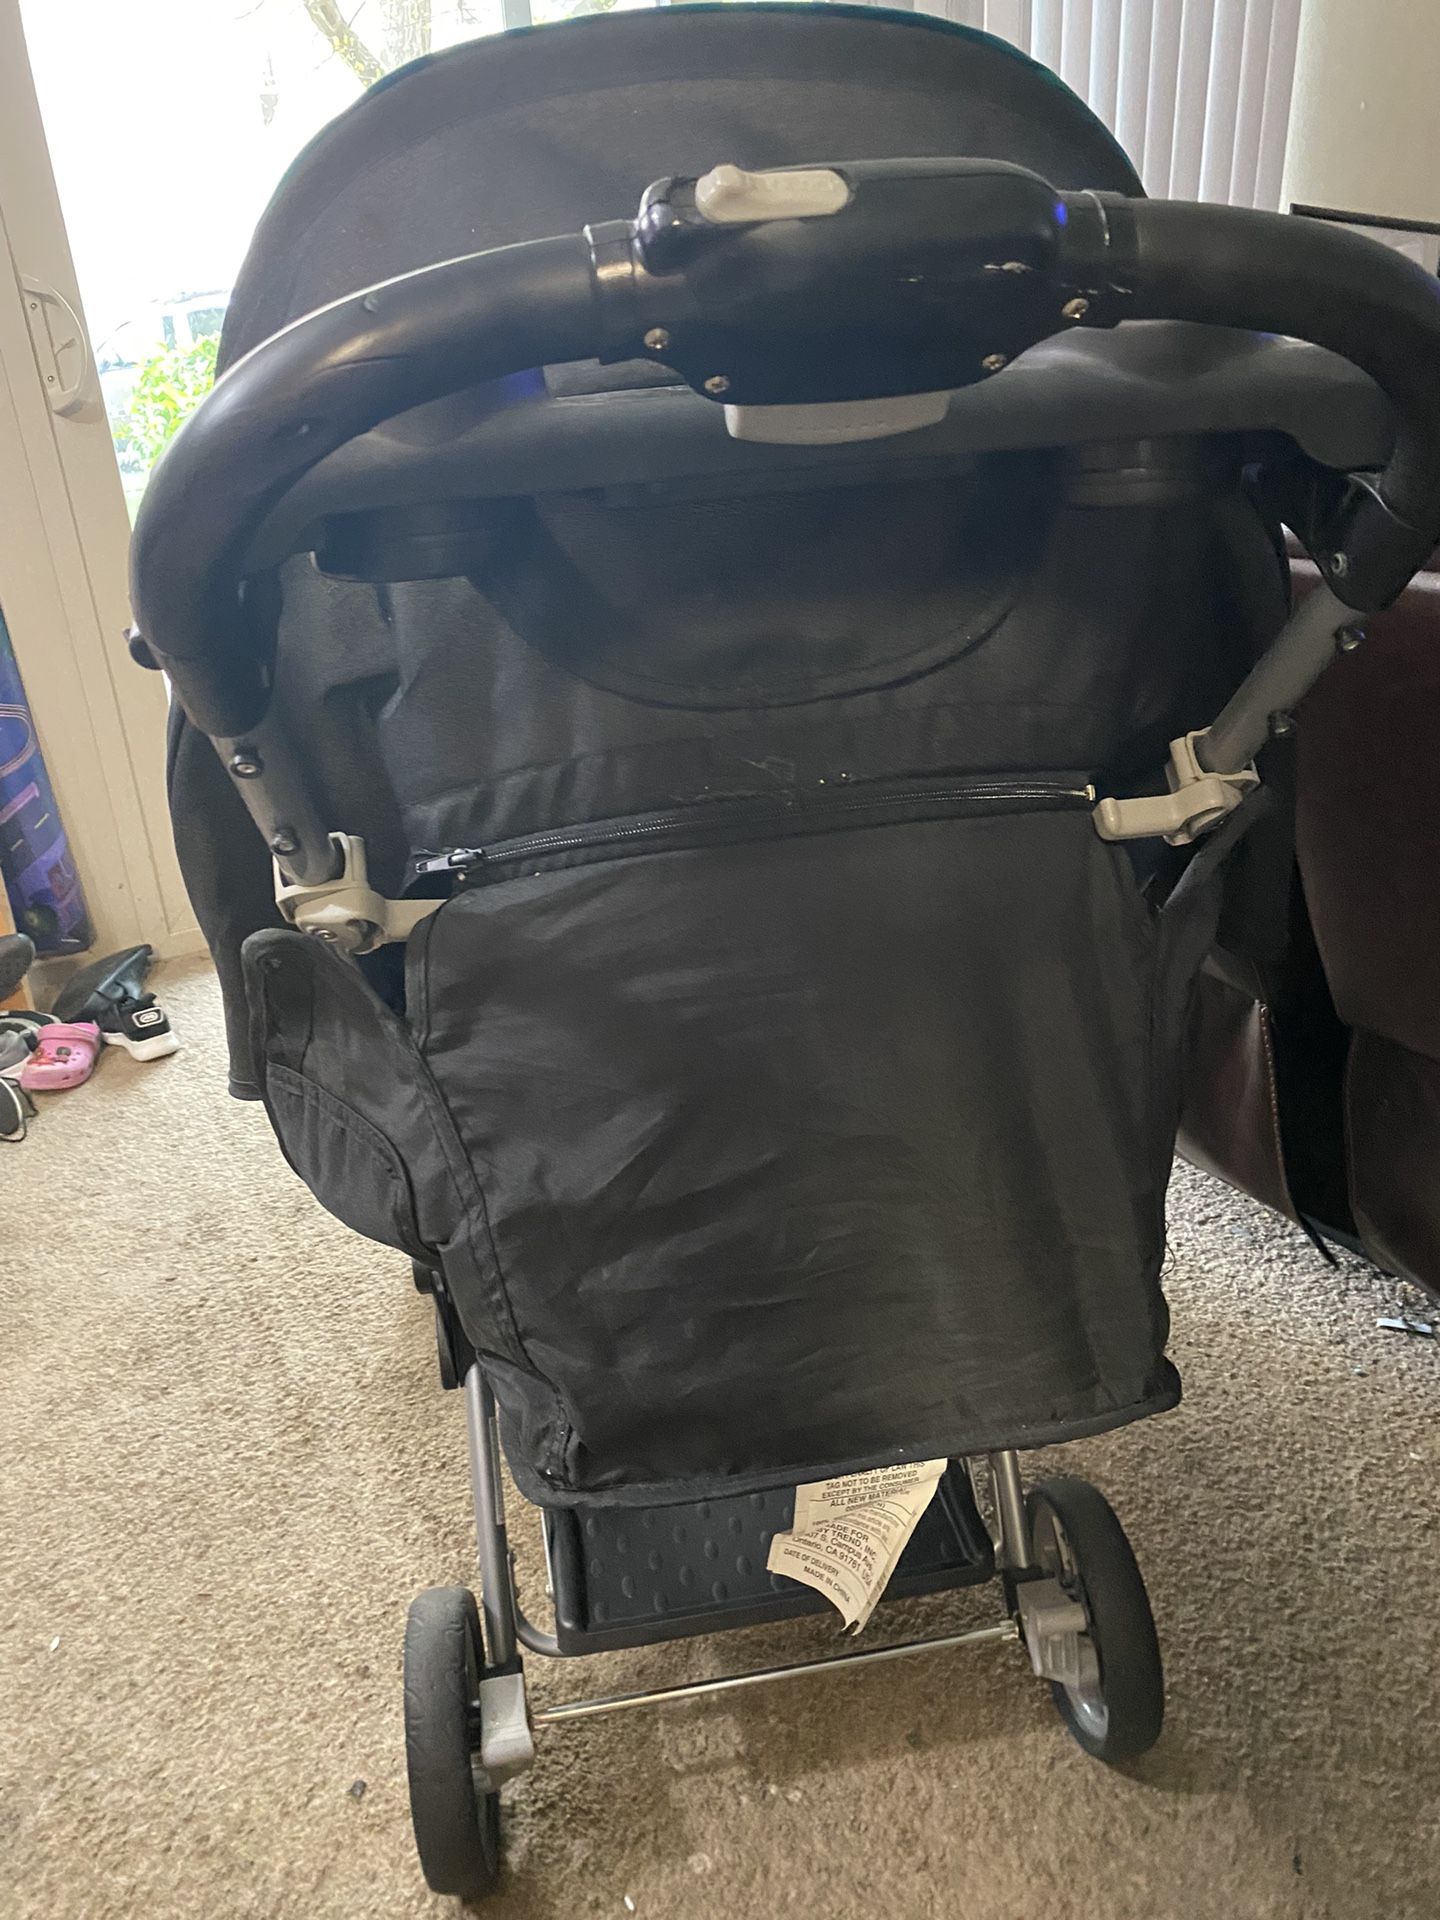 Sit N Stand Stroller Need Gone ASAP